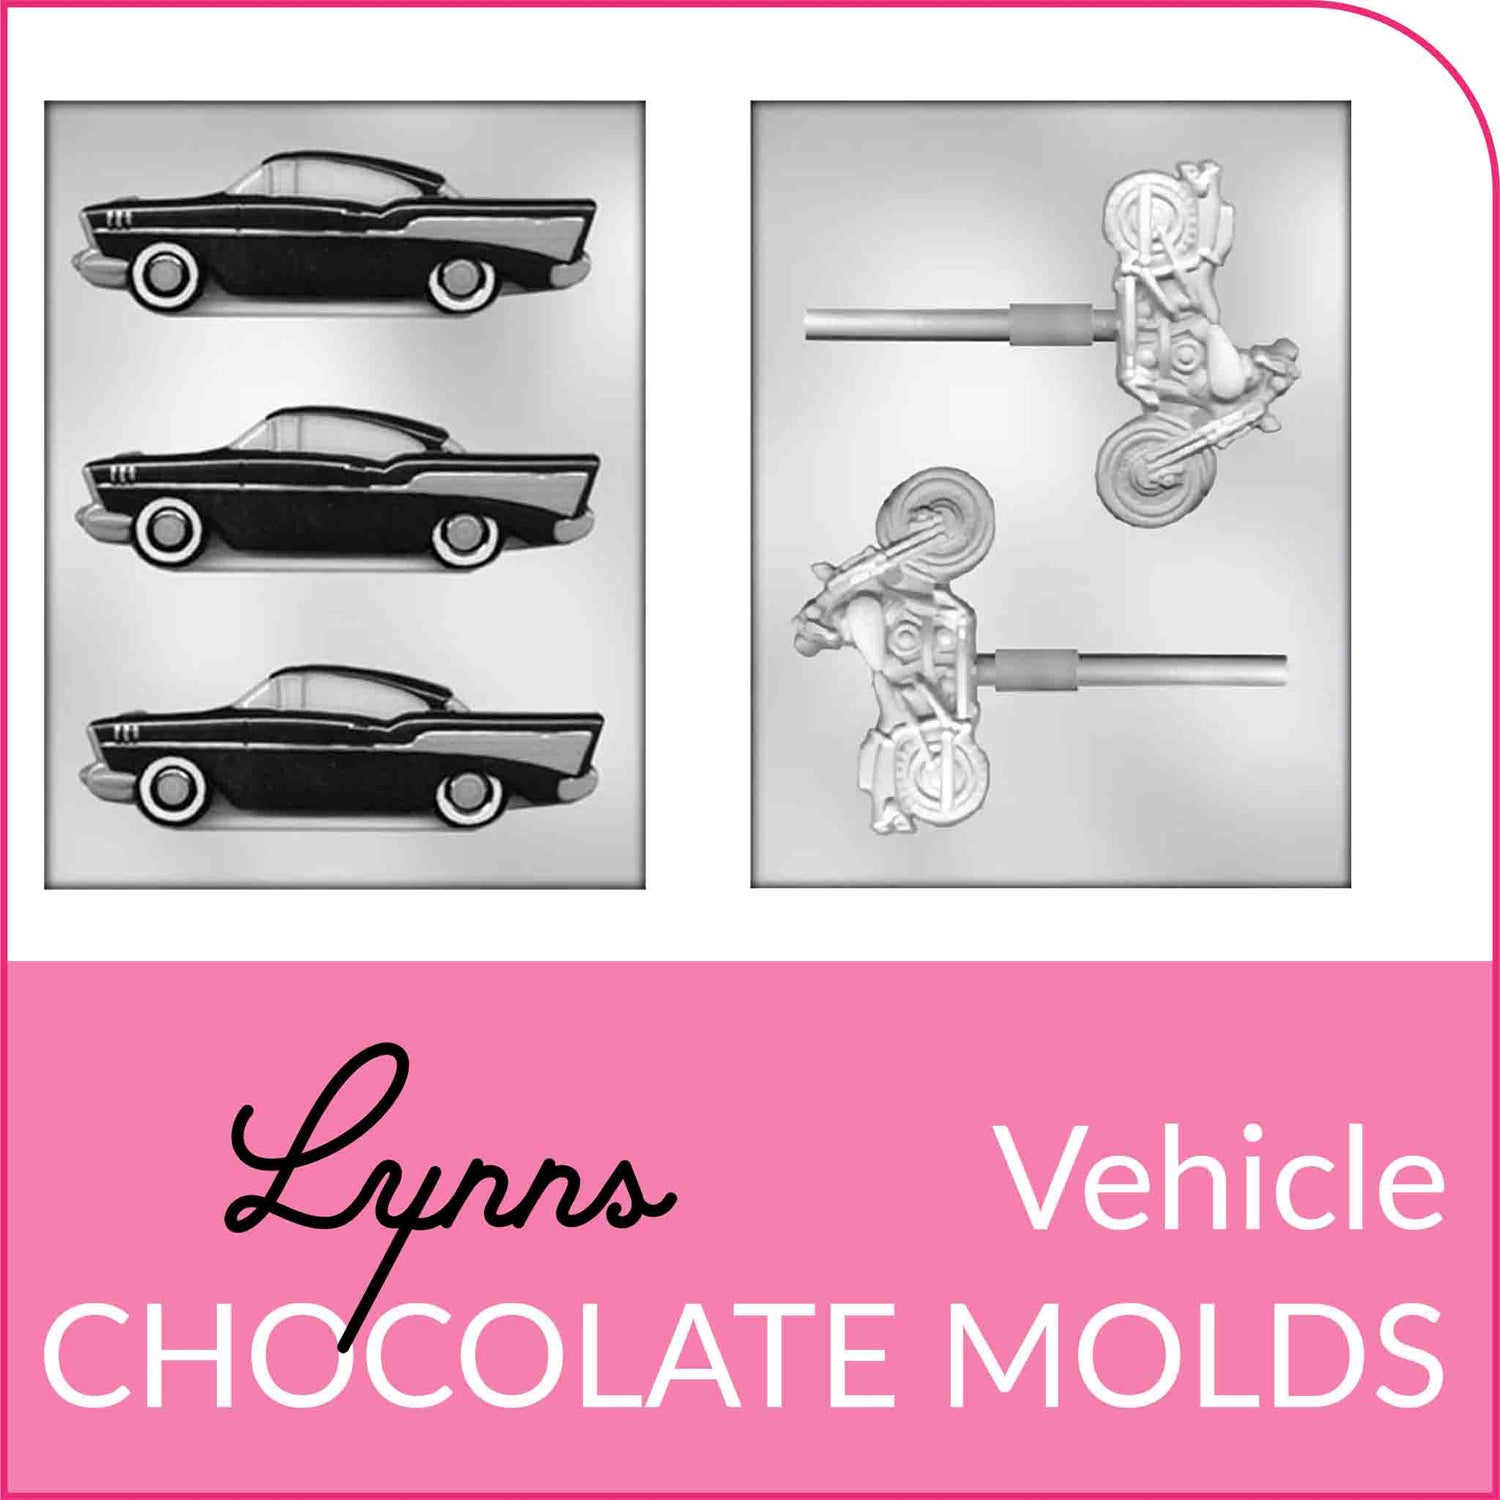 Shop Vehicle Shaped Chocolate Molds from Lynn's